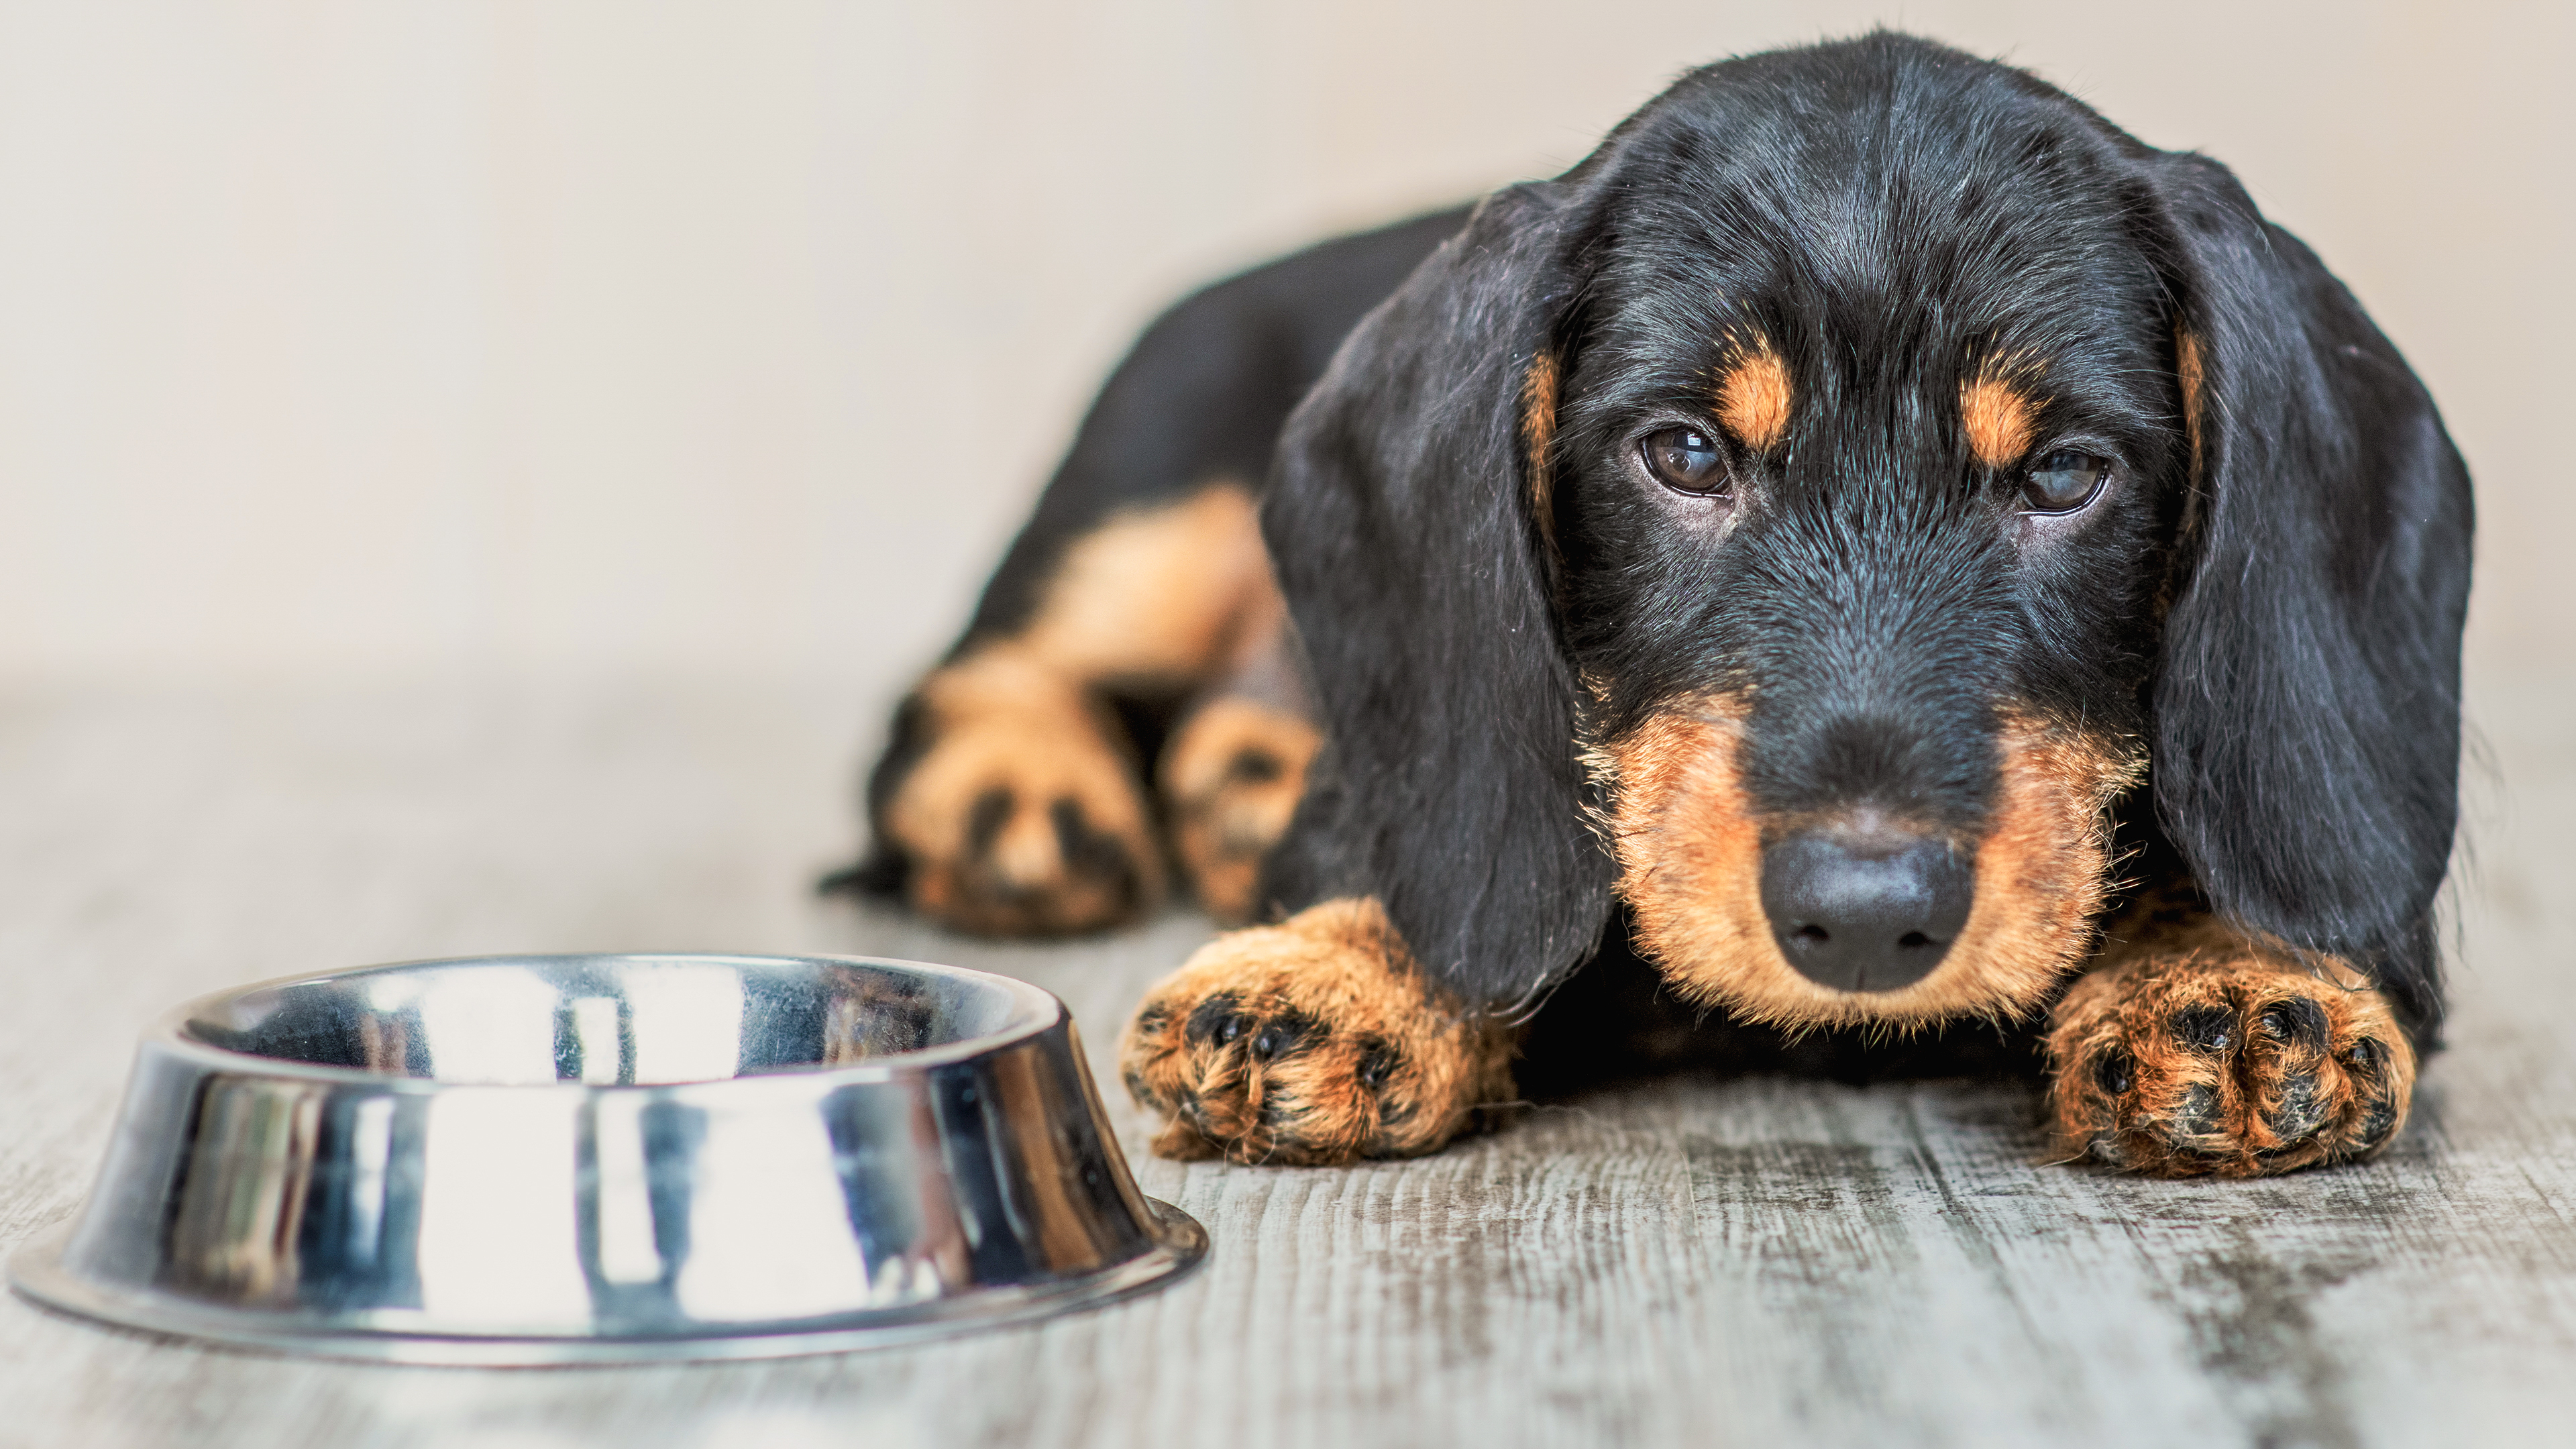 Dachshund puppy lying down on a wooden floor next to a stainless steel feeding bowl